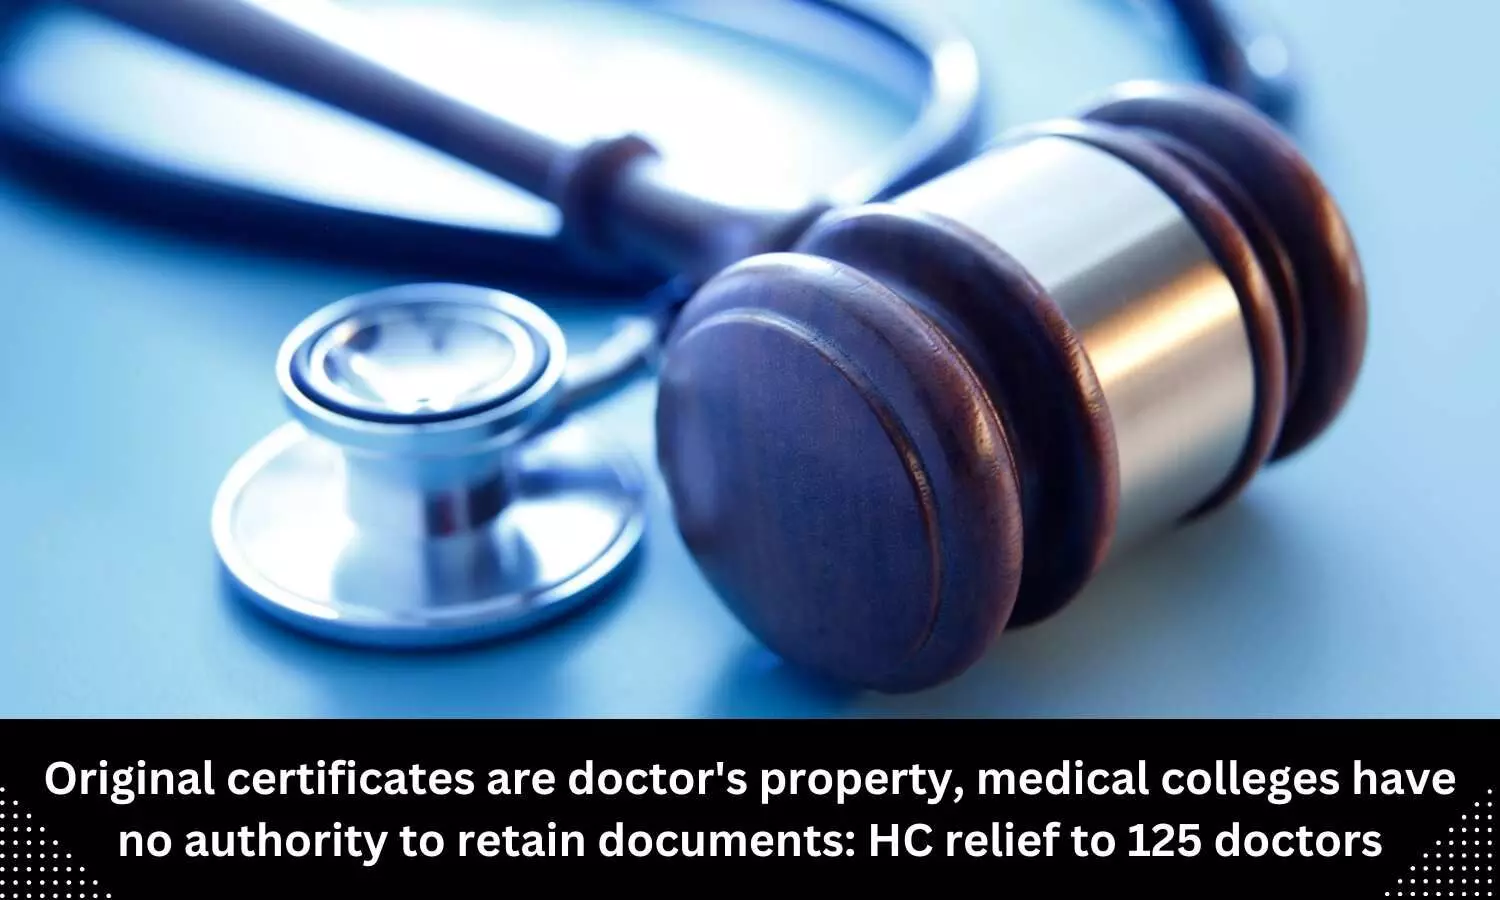 Original certificates are doctors property, medical colleges have no authority to retain documents: HC relief to 125 doctors